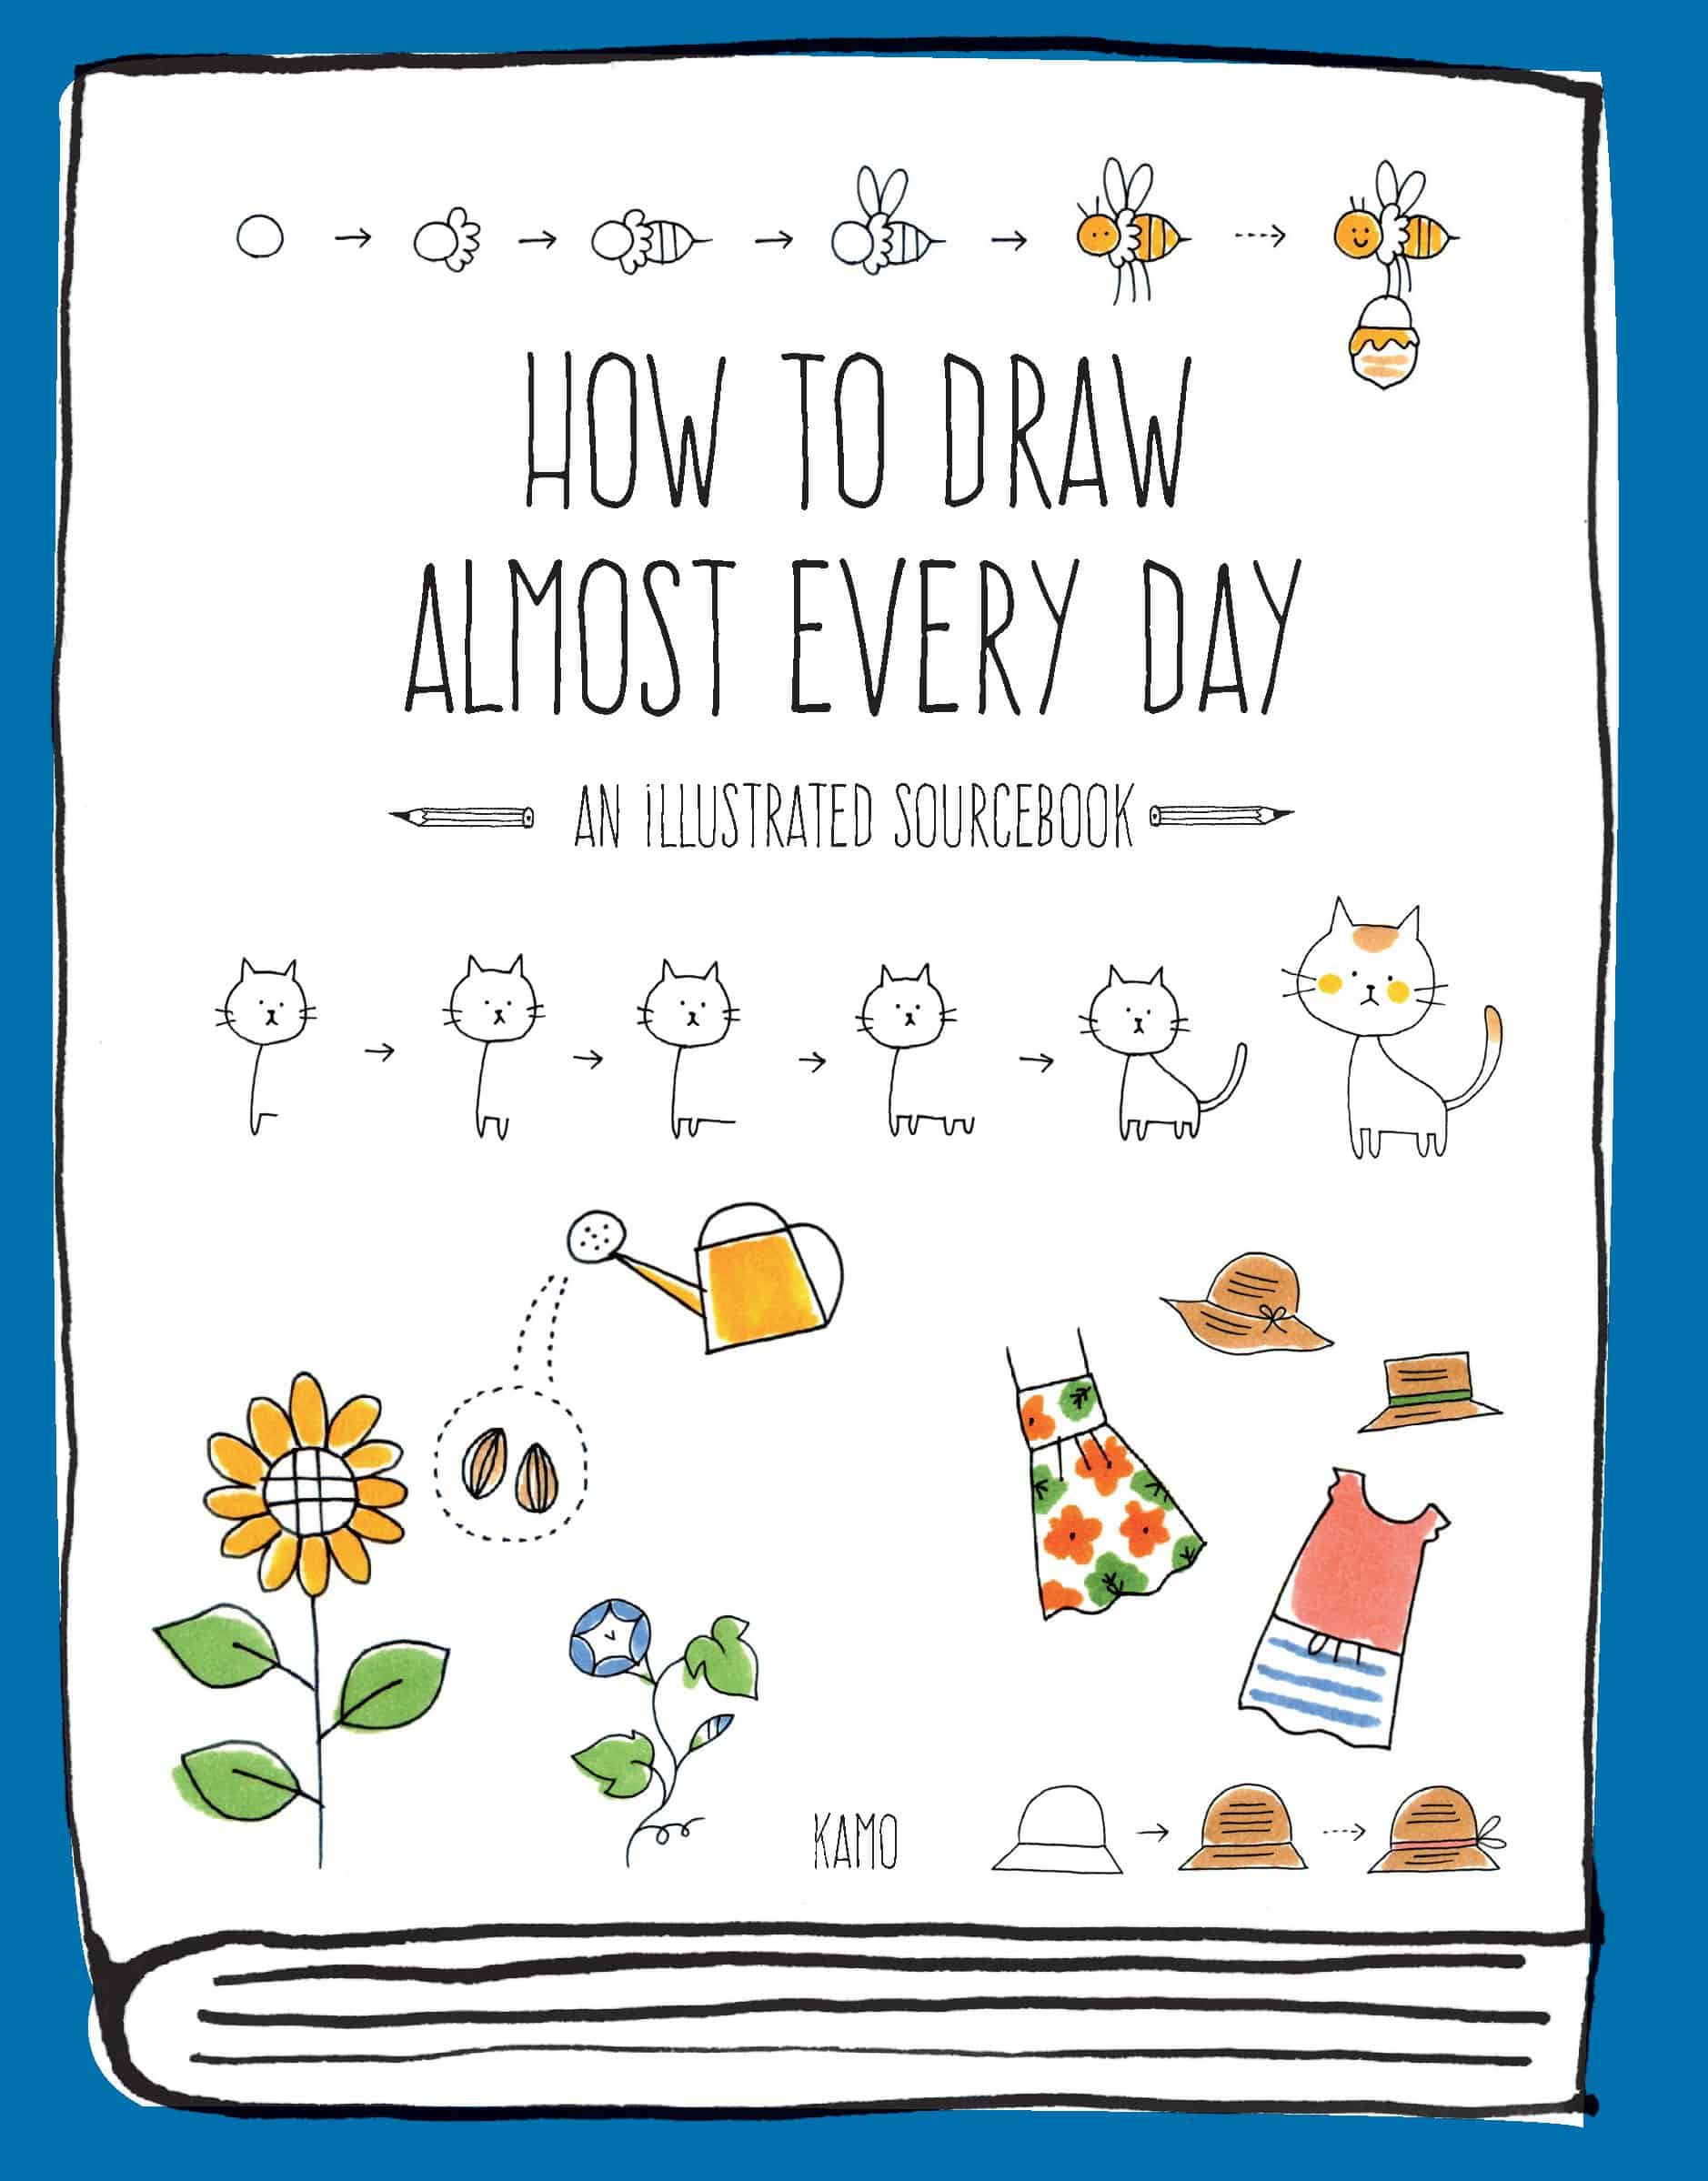 How to Draw Almost Every Day by Kamo